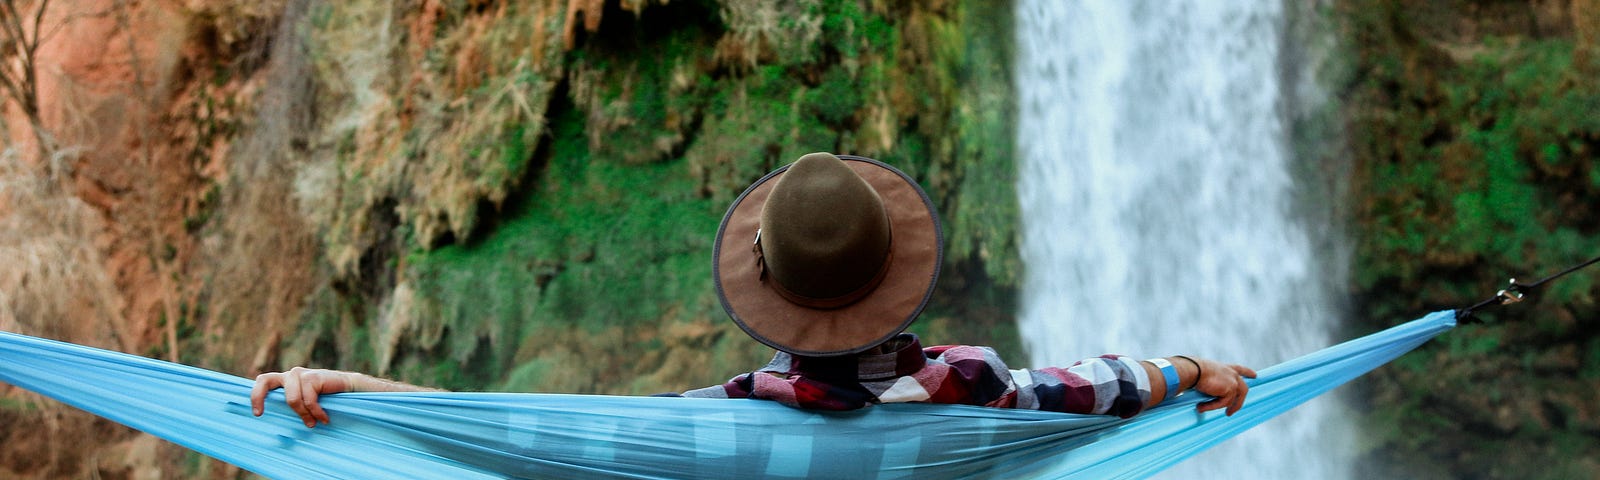 Young creator and entrepreneur wearing a hat and shorts relaxing on a net next to a waterfall and enjoying the revenue benefits of multiple passive income streams.